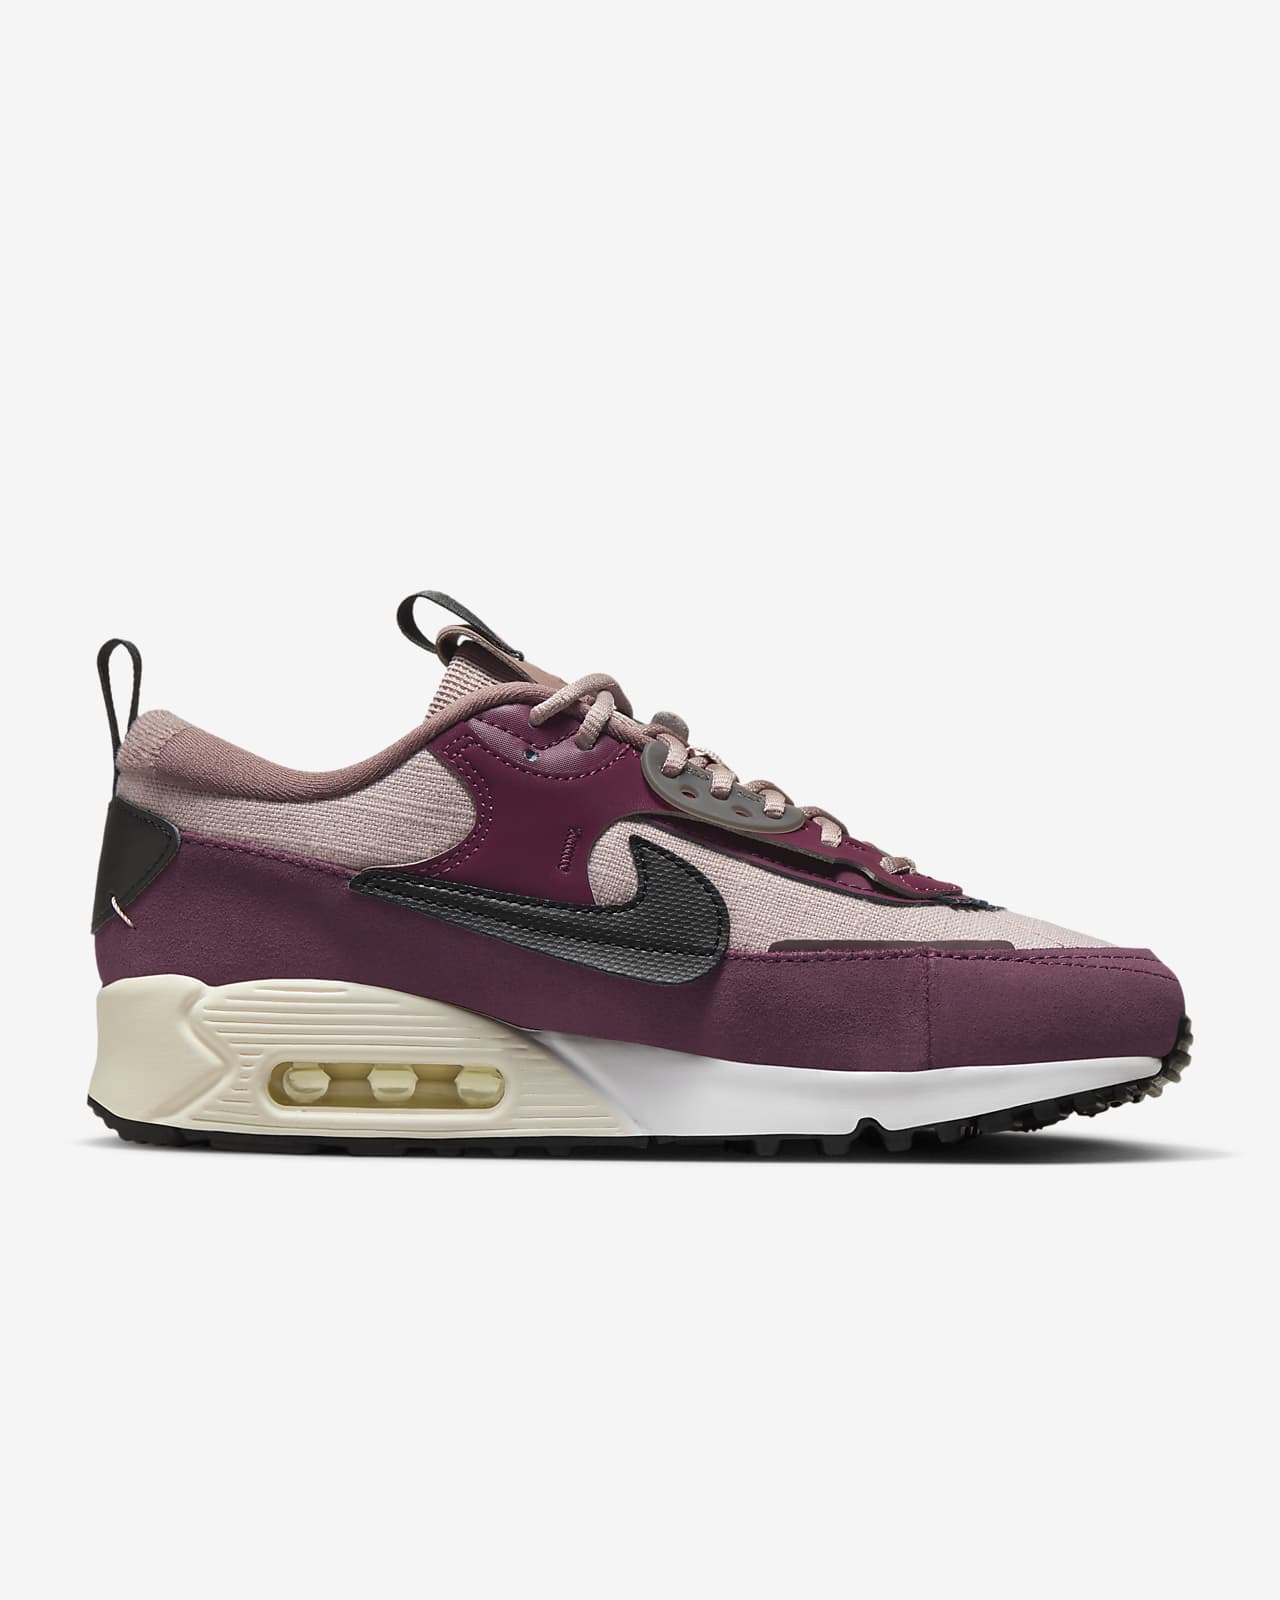 Nike Women's Air Max 90 Futura Casual Sneakers from Finish Line - Macy's